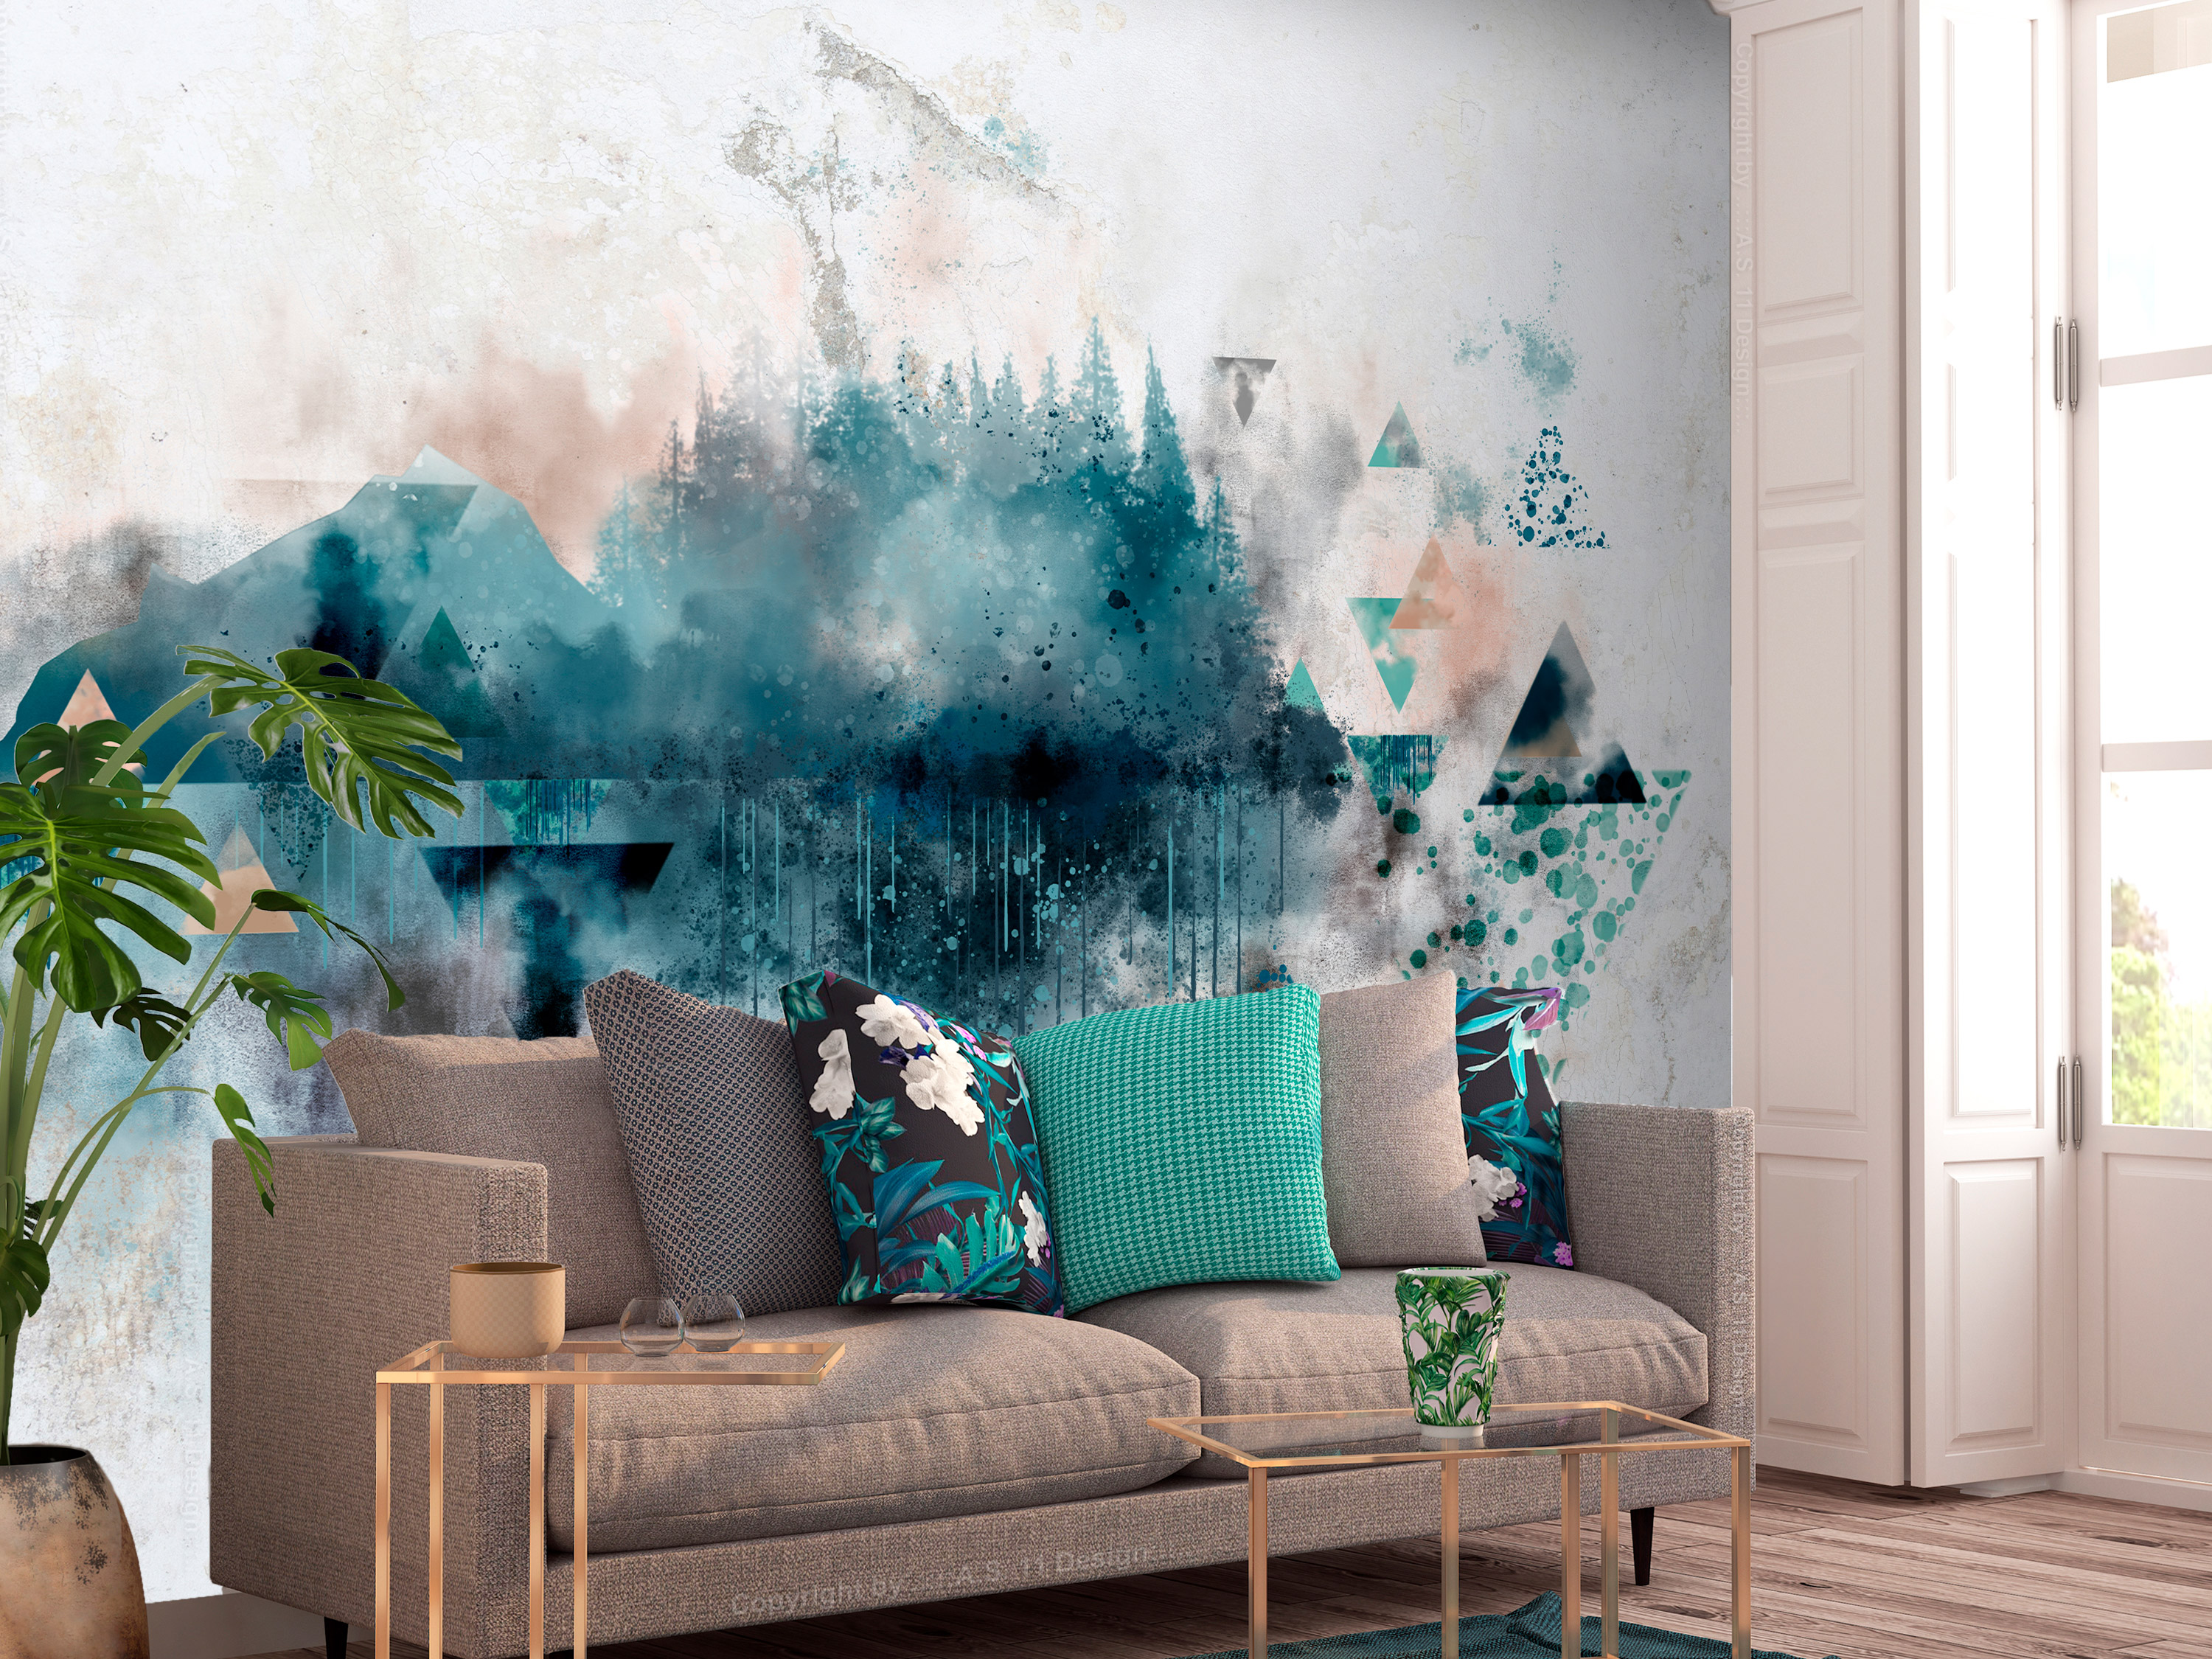 home decor premium photography large bedroom 3d wall paper for walls picture DIY decorative panel poster xxl high quality digital roll living room